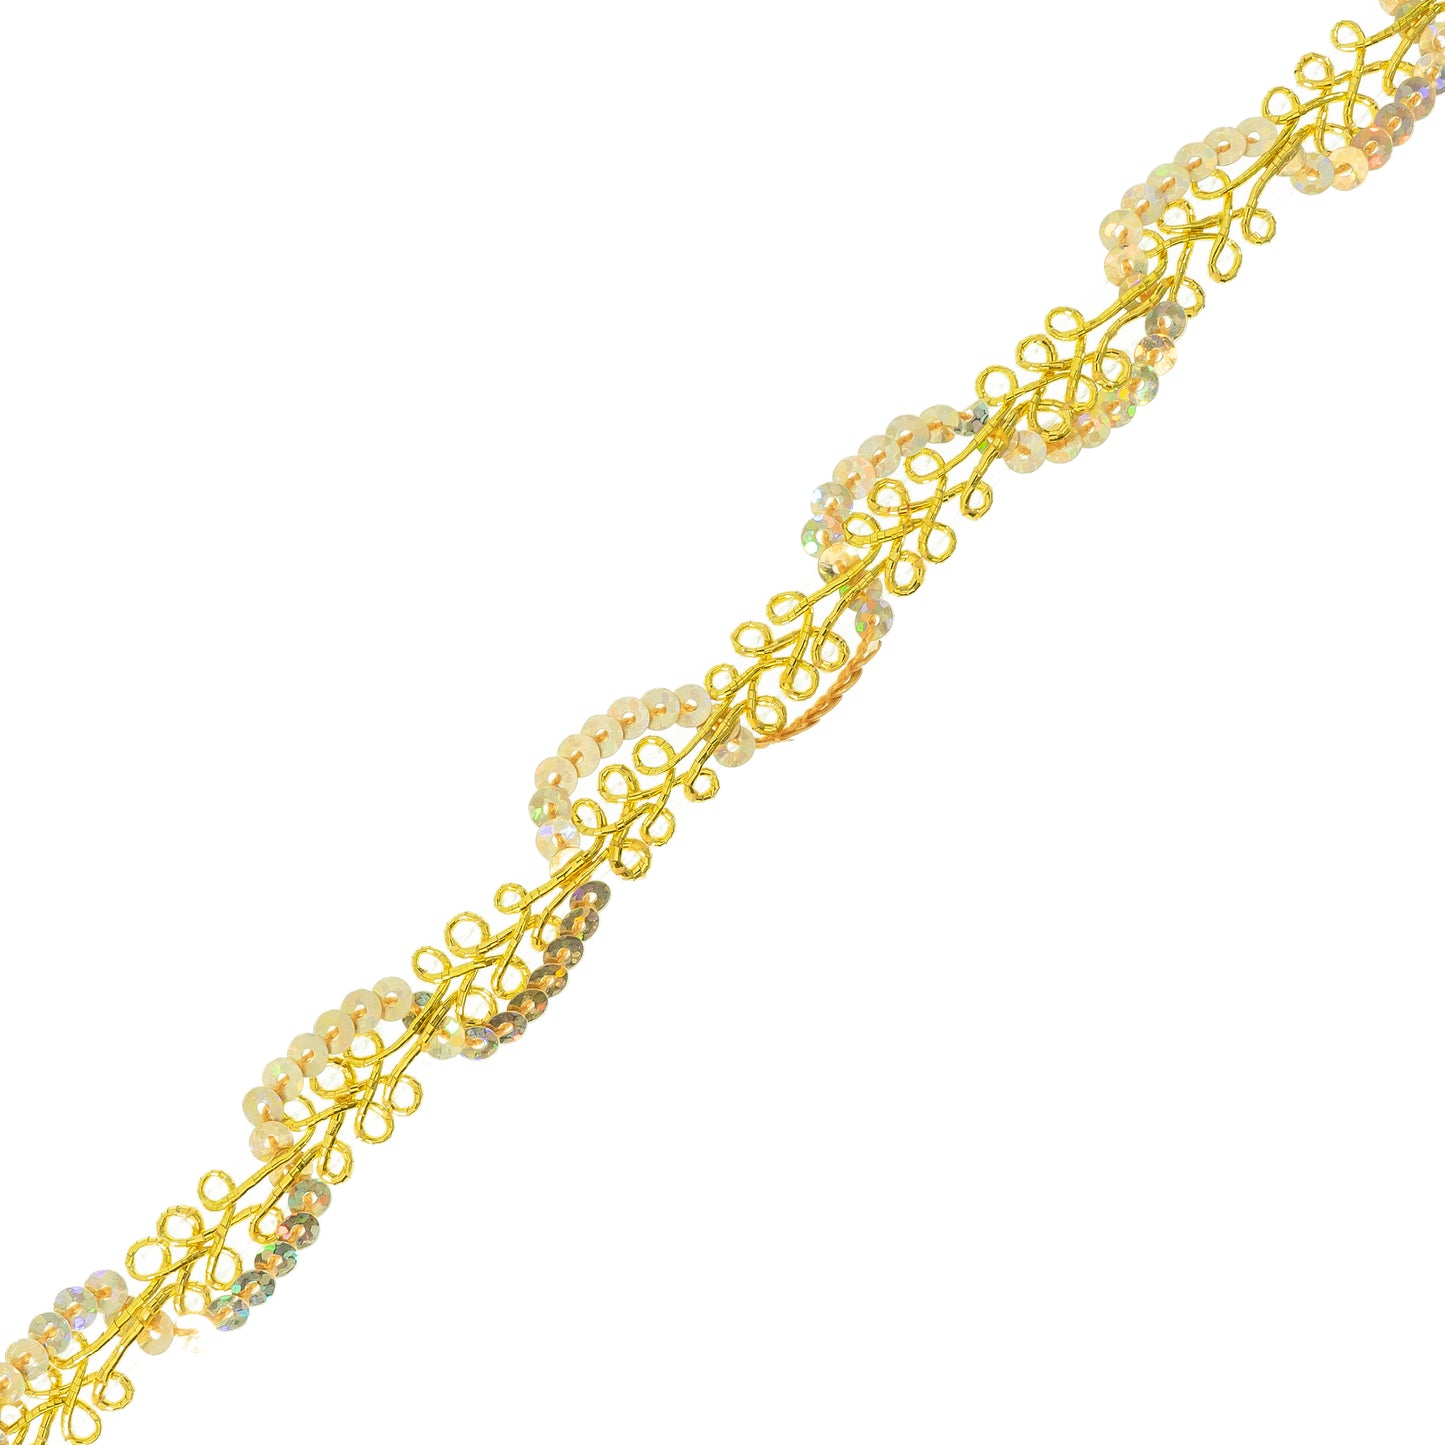 Lila Sequin Loop Braid Trim (1/2") (Sold by the Yard)